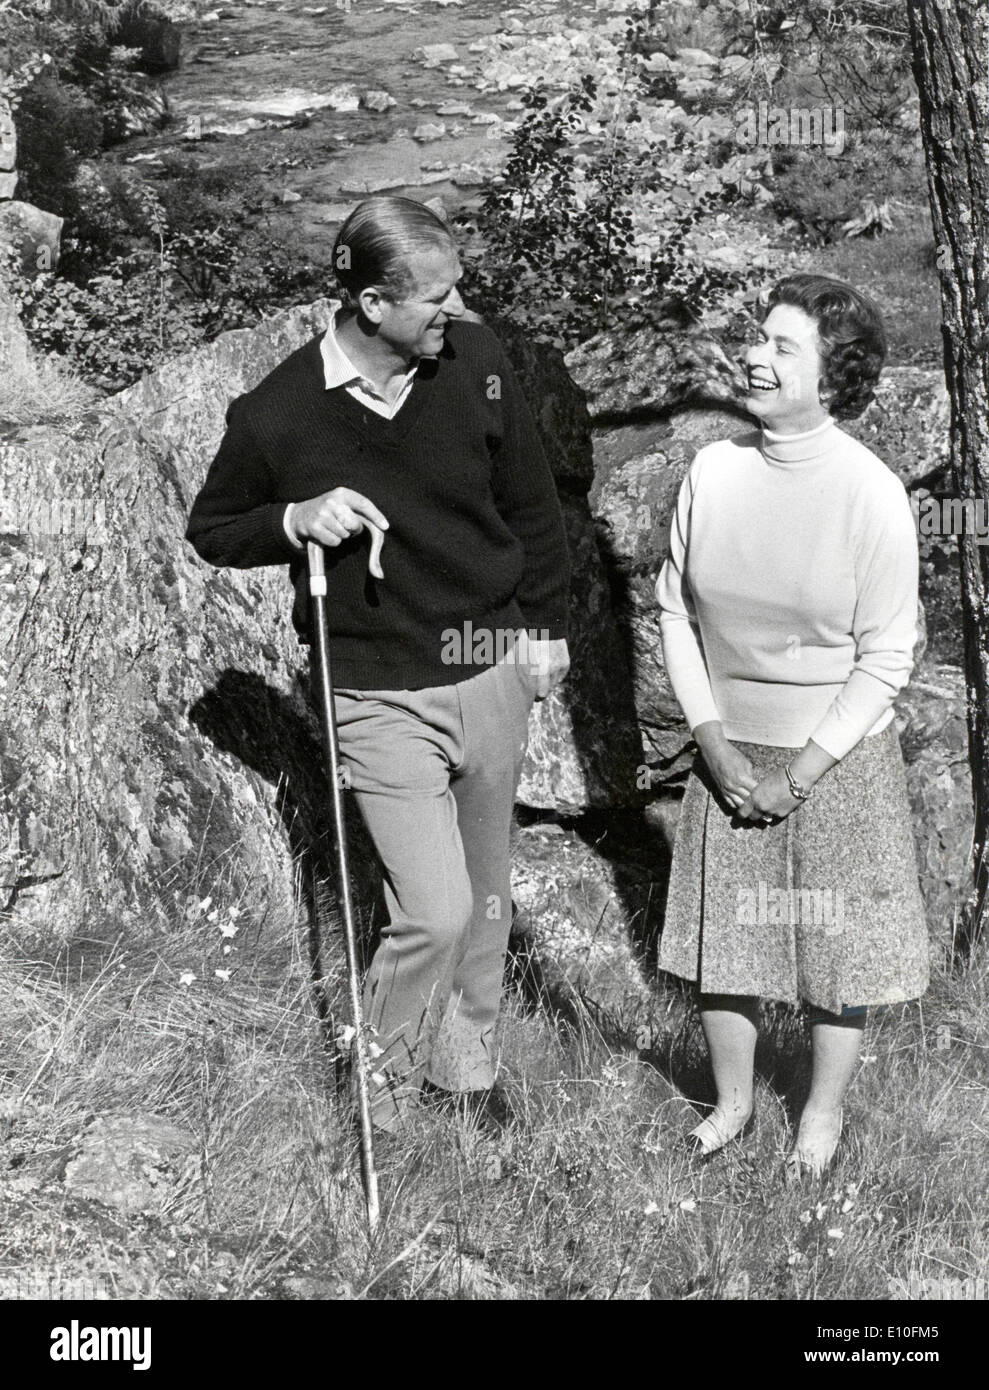 Queen Elizabeth II and Prince Philip go for a walk Stock Photo - Alamy